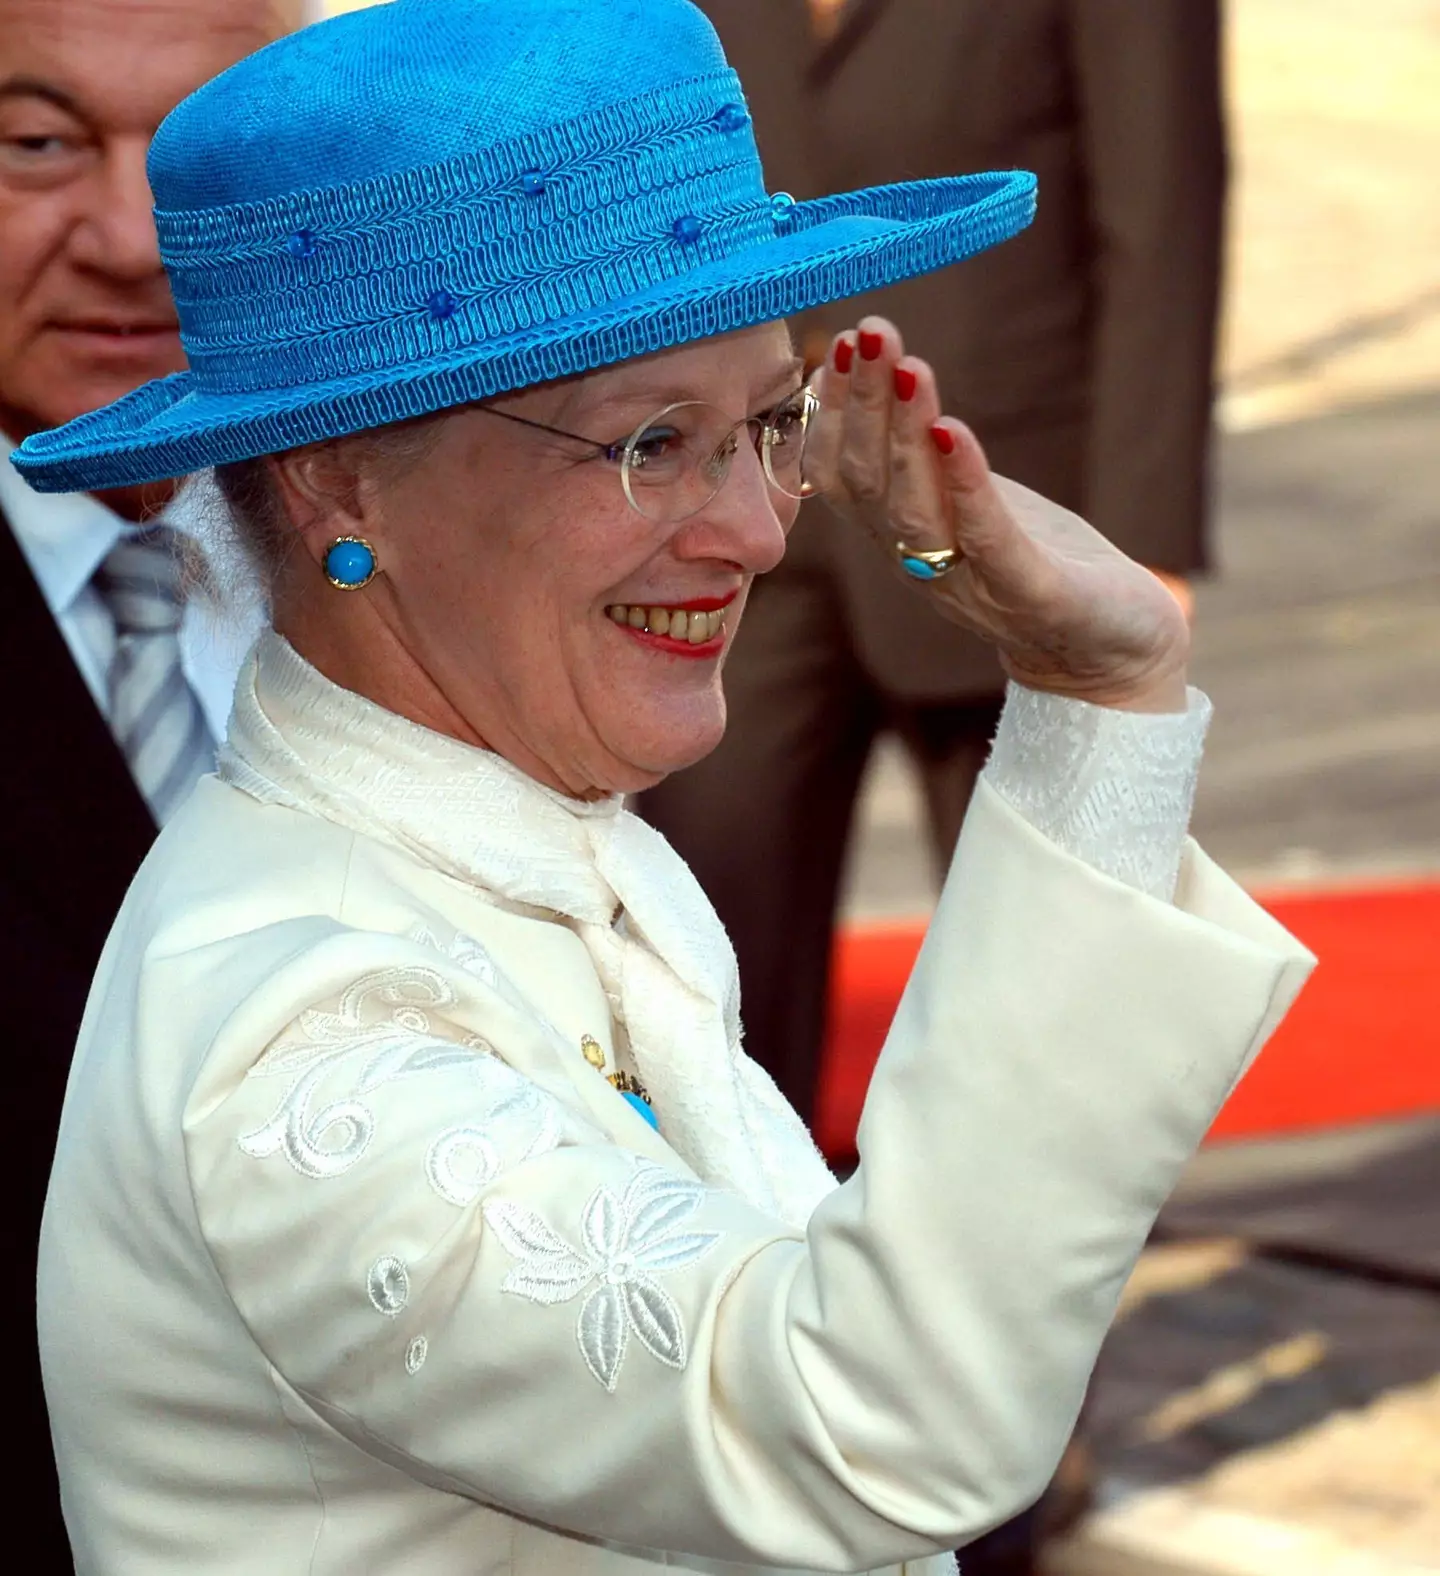 The Queen of Denmark has stripped four of her grandchildren of their royal titles.